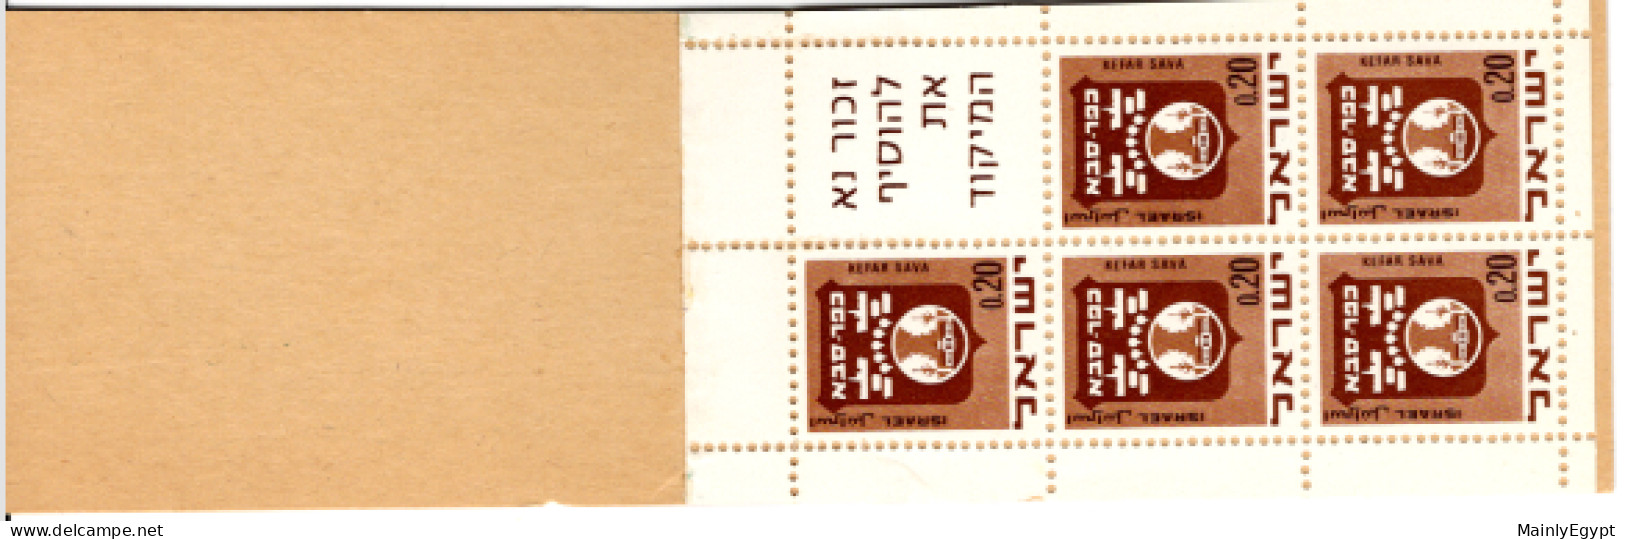 ISRAEL:  Stamp Booklet 1971 Cities 0.20 Shekel MNH #F028 - Carnets